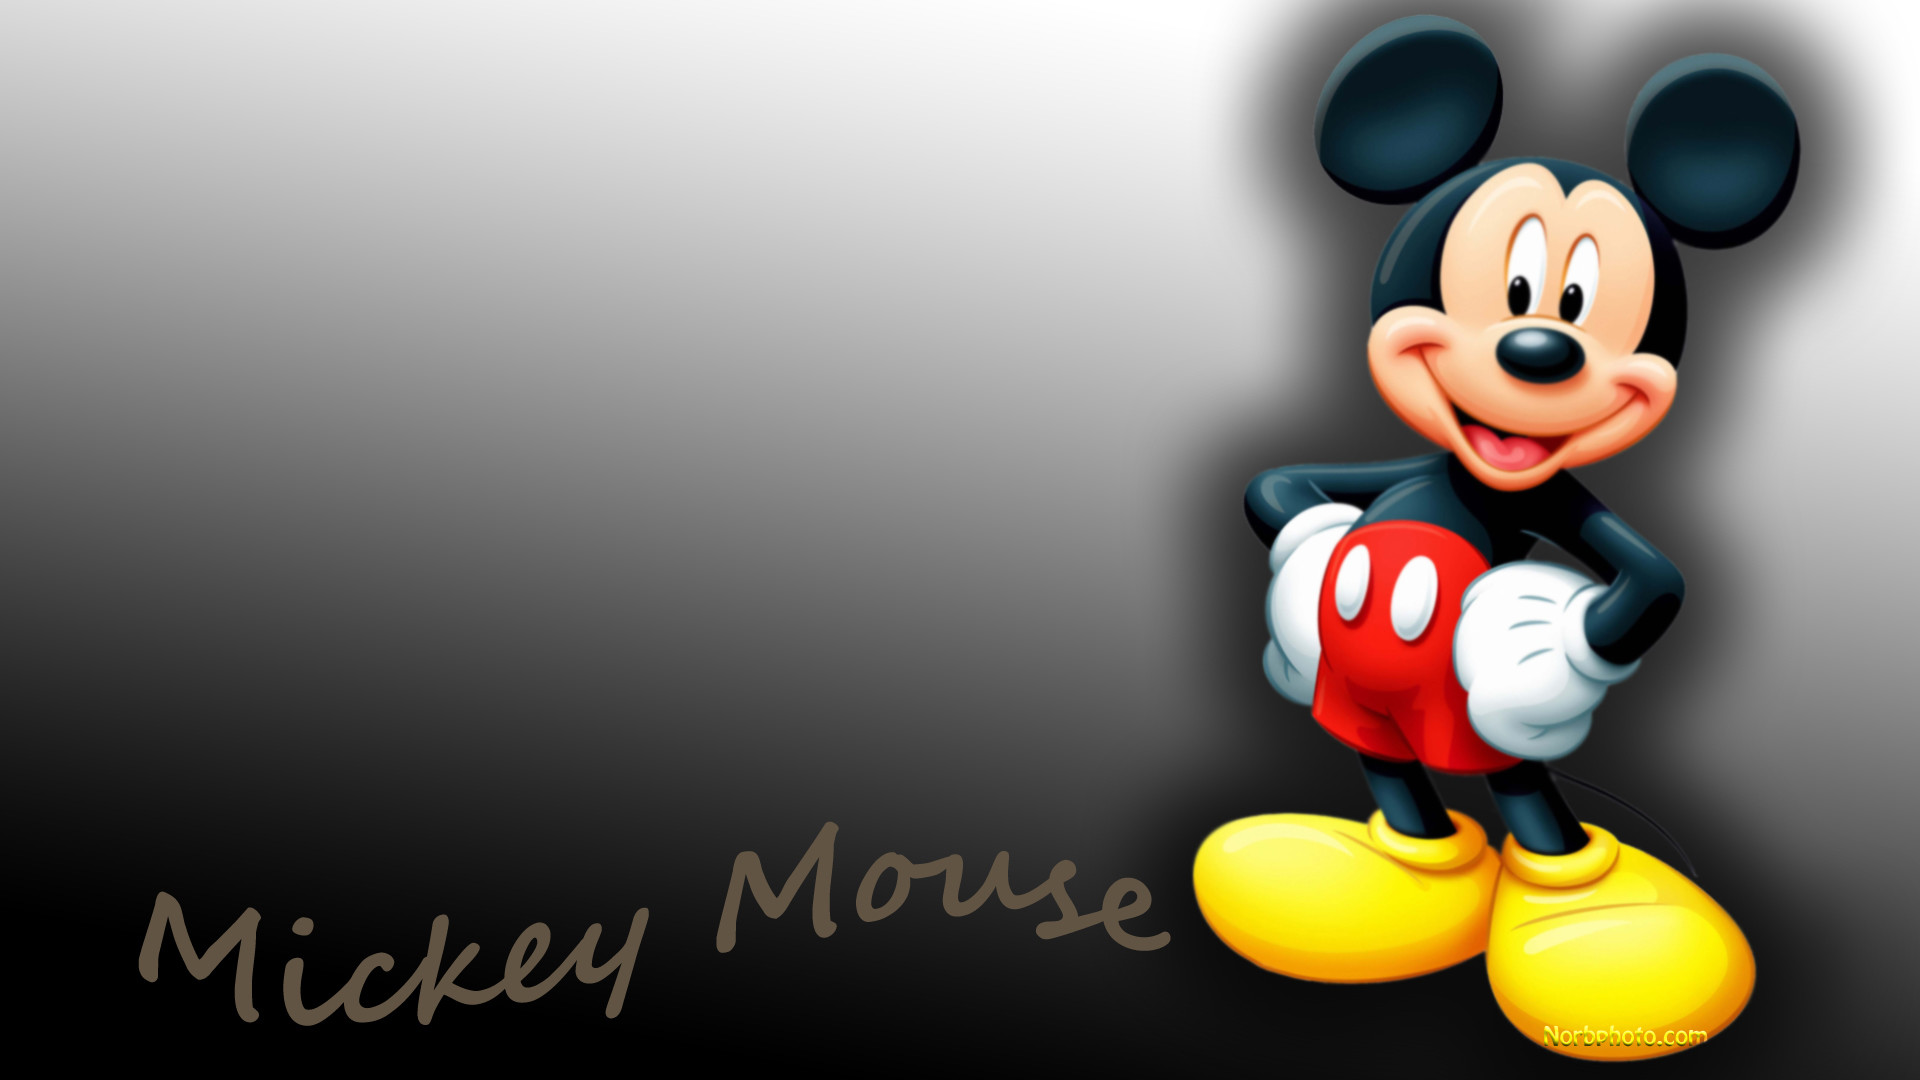 1920x1080 Explore Mickey Mouse Wallpaper and more!